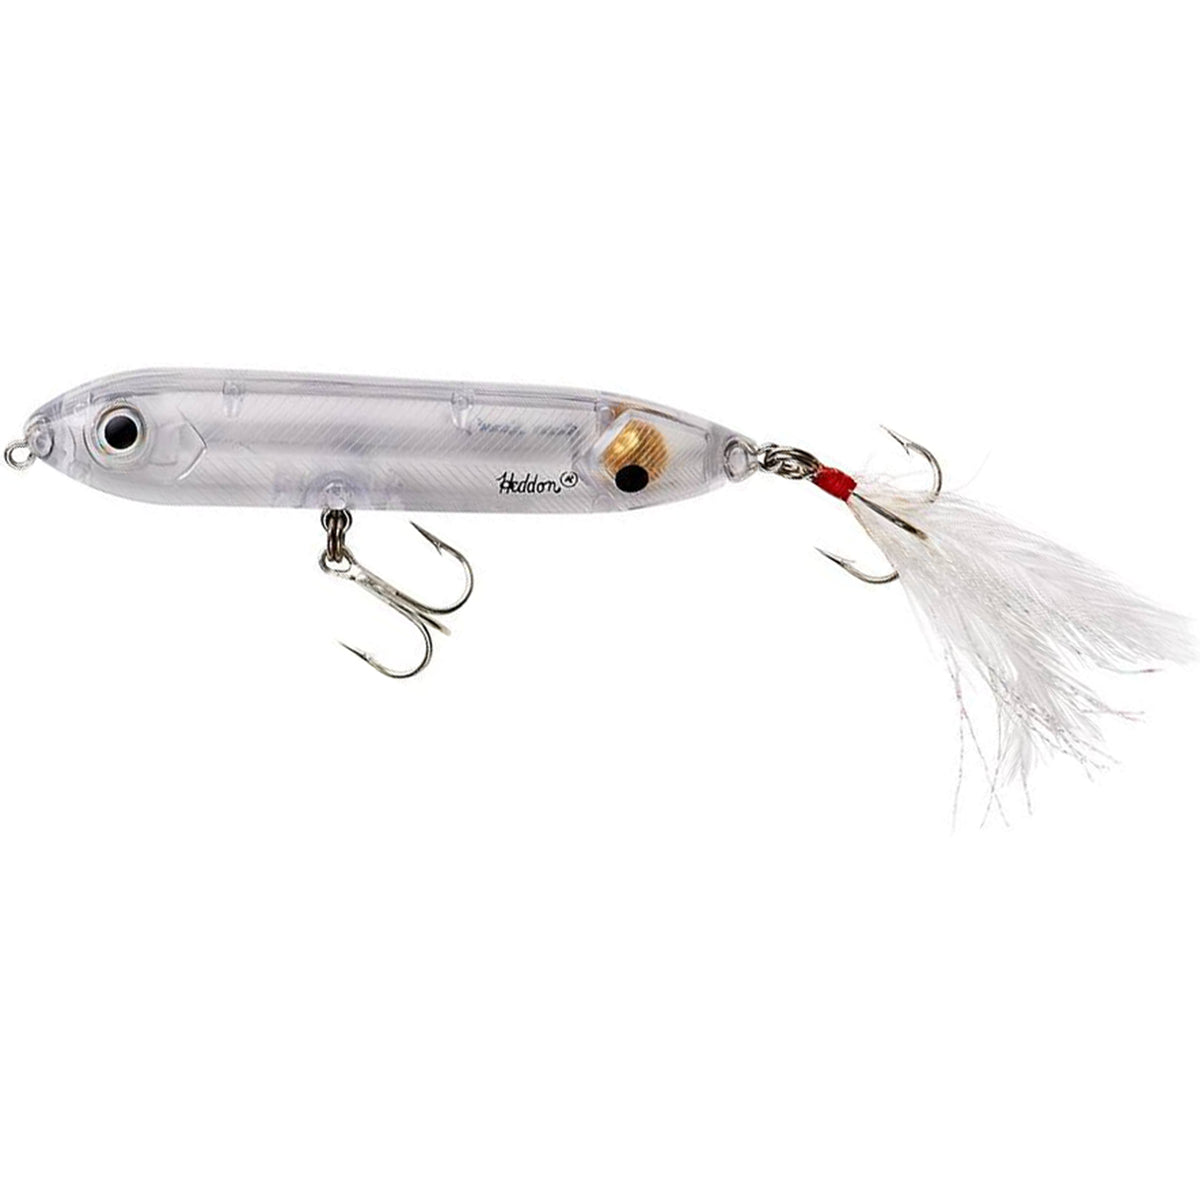 Heddon Super Spook Topwater Fishing Lure for Saltwater and Freshwater,  Redfish, (1/2 oz)